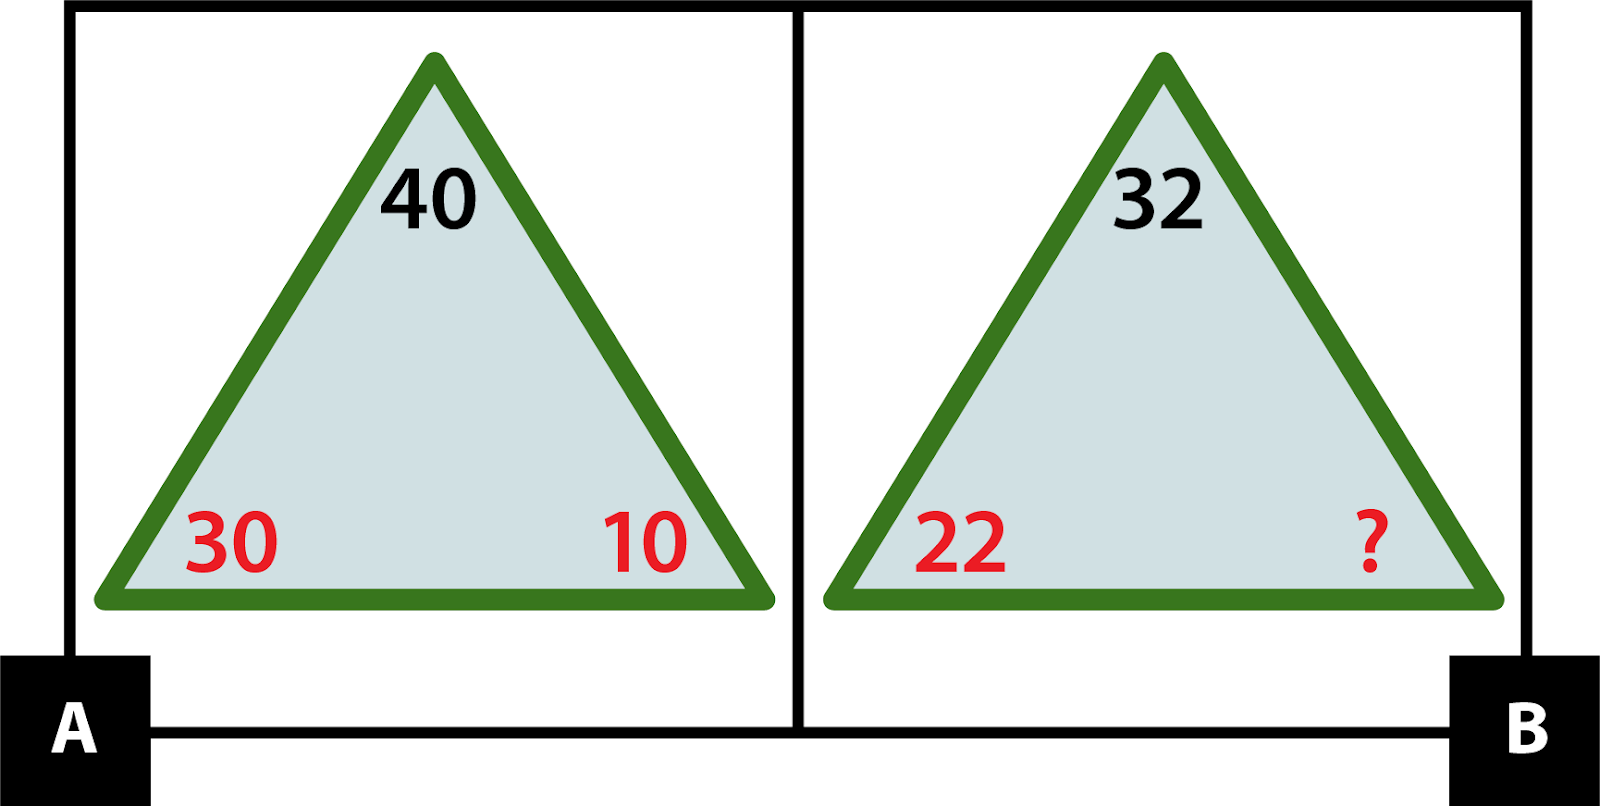 A: Triangle with black 40 in the top corner, red 10 in the bottom right corner, and red 30 in the bottom left corner. B: Triangle with black 32 in the top corner, a red question mark in the bottom right corner, and red 22 in the bottom left corner.